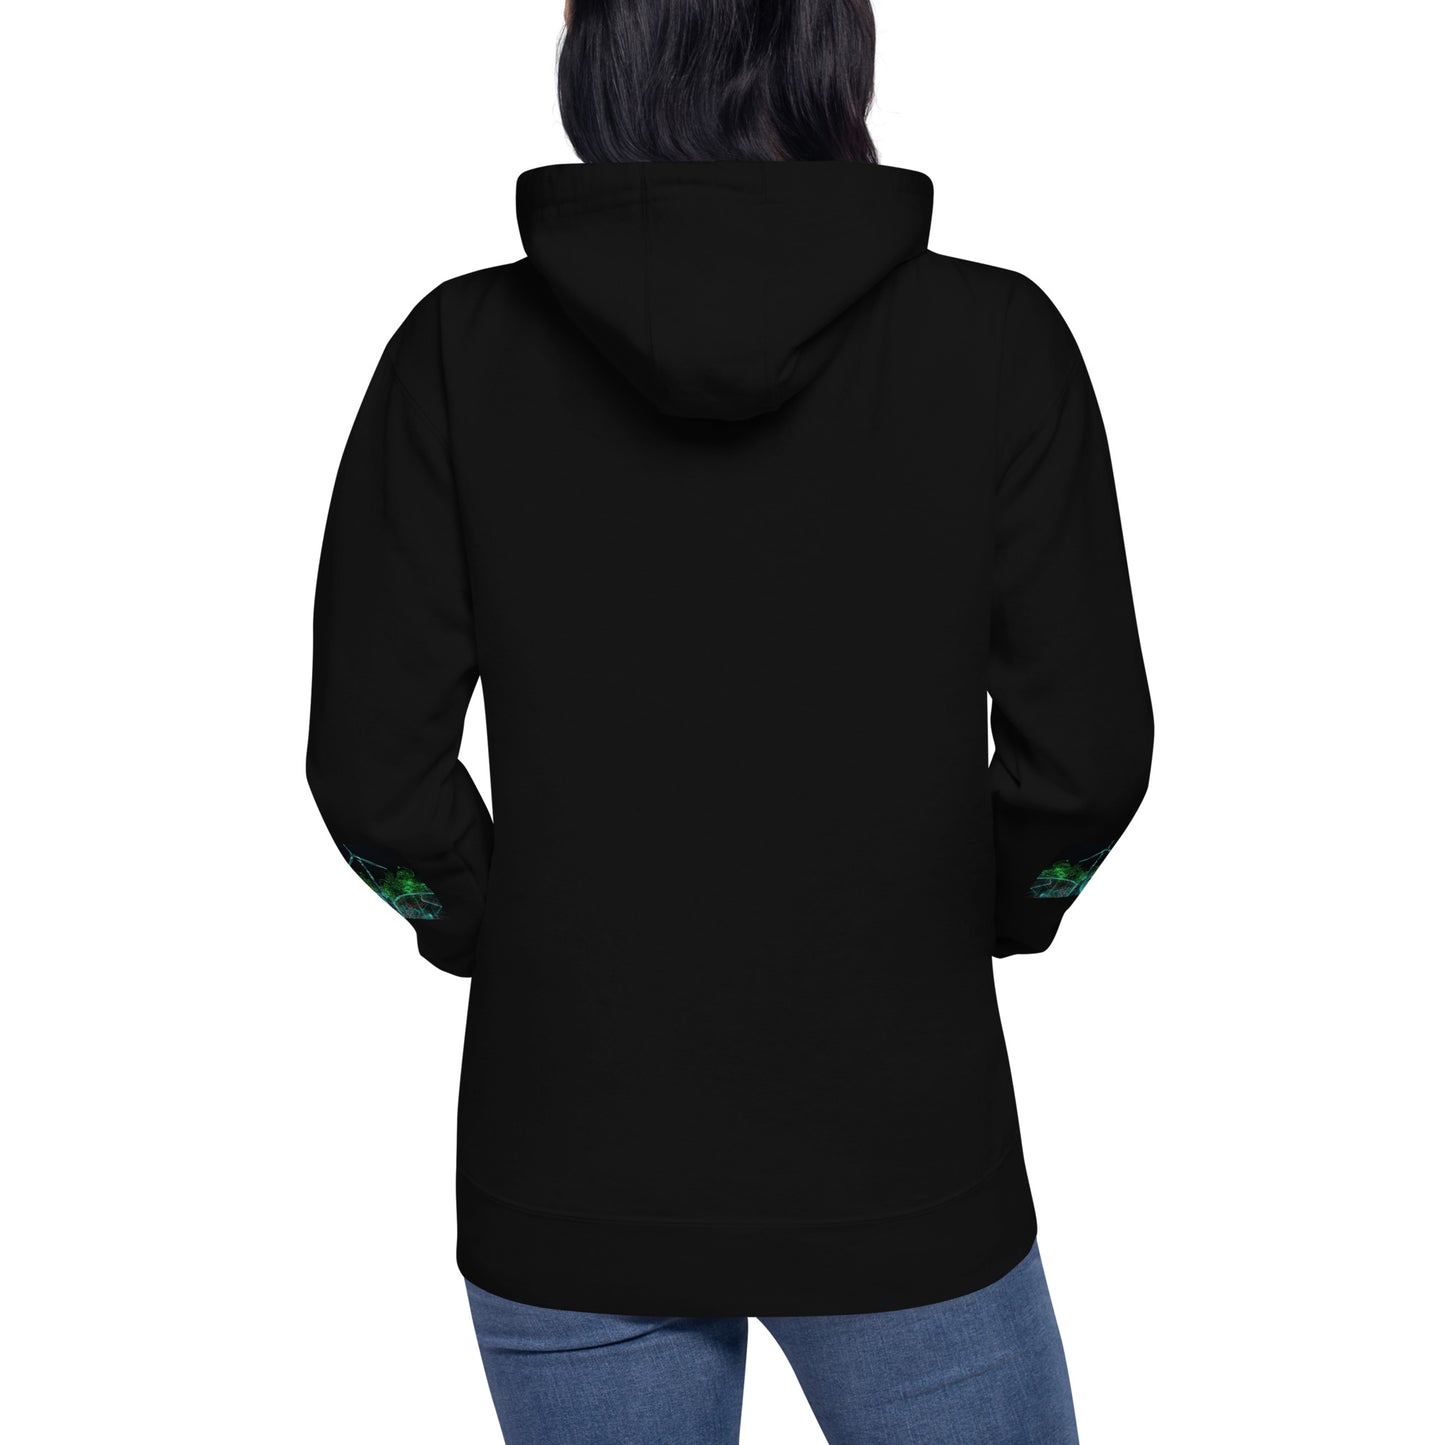 Stay Warm and Stylish with Our Abstract Green Unisex Hoodie - Shop Now!